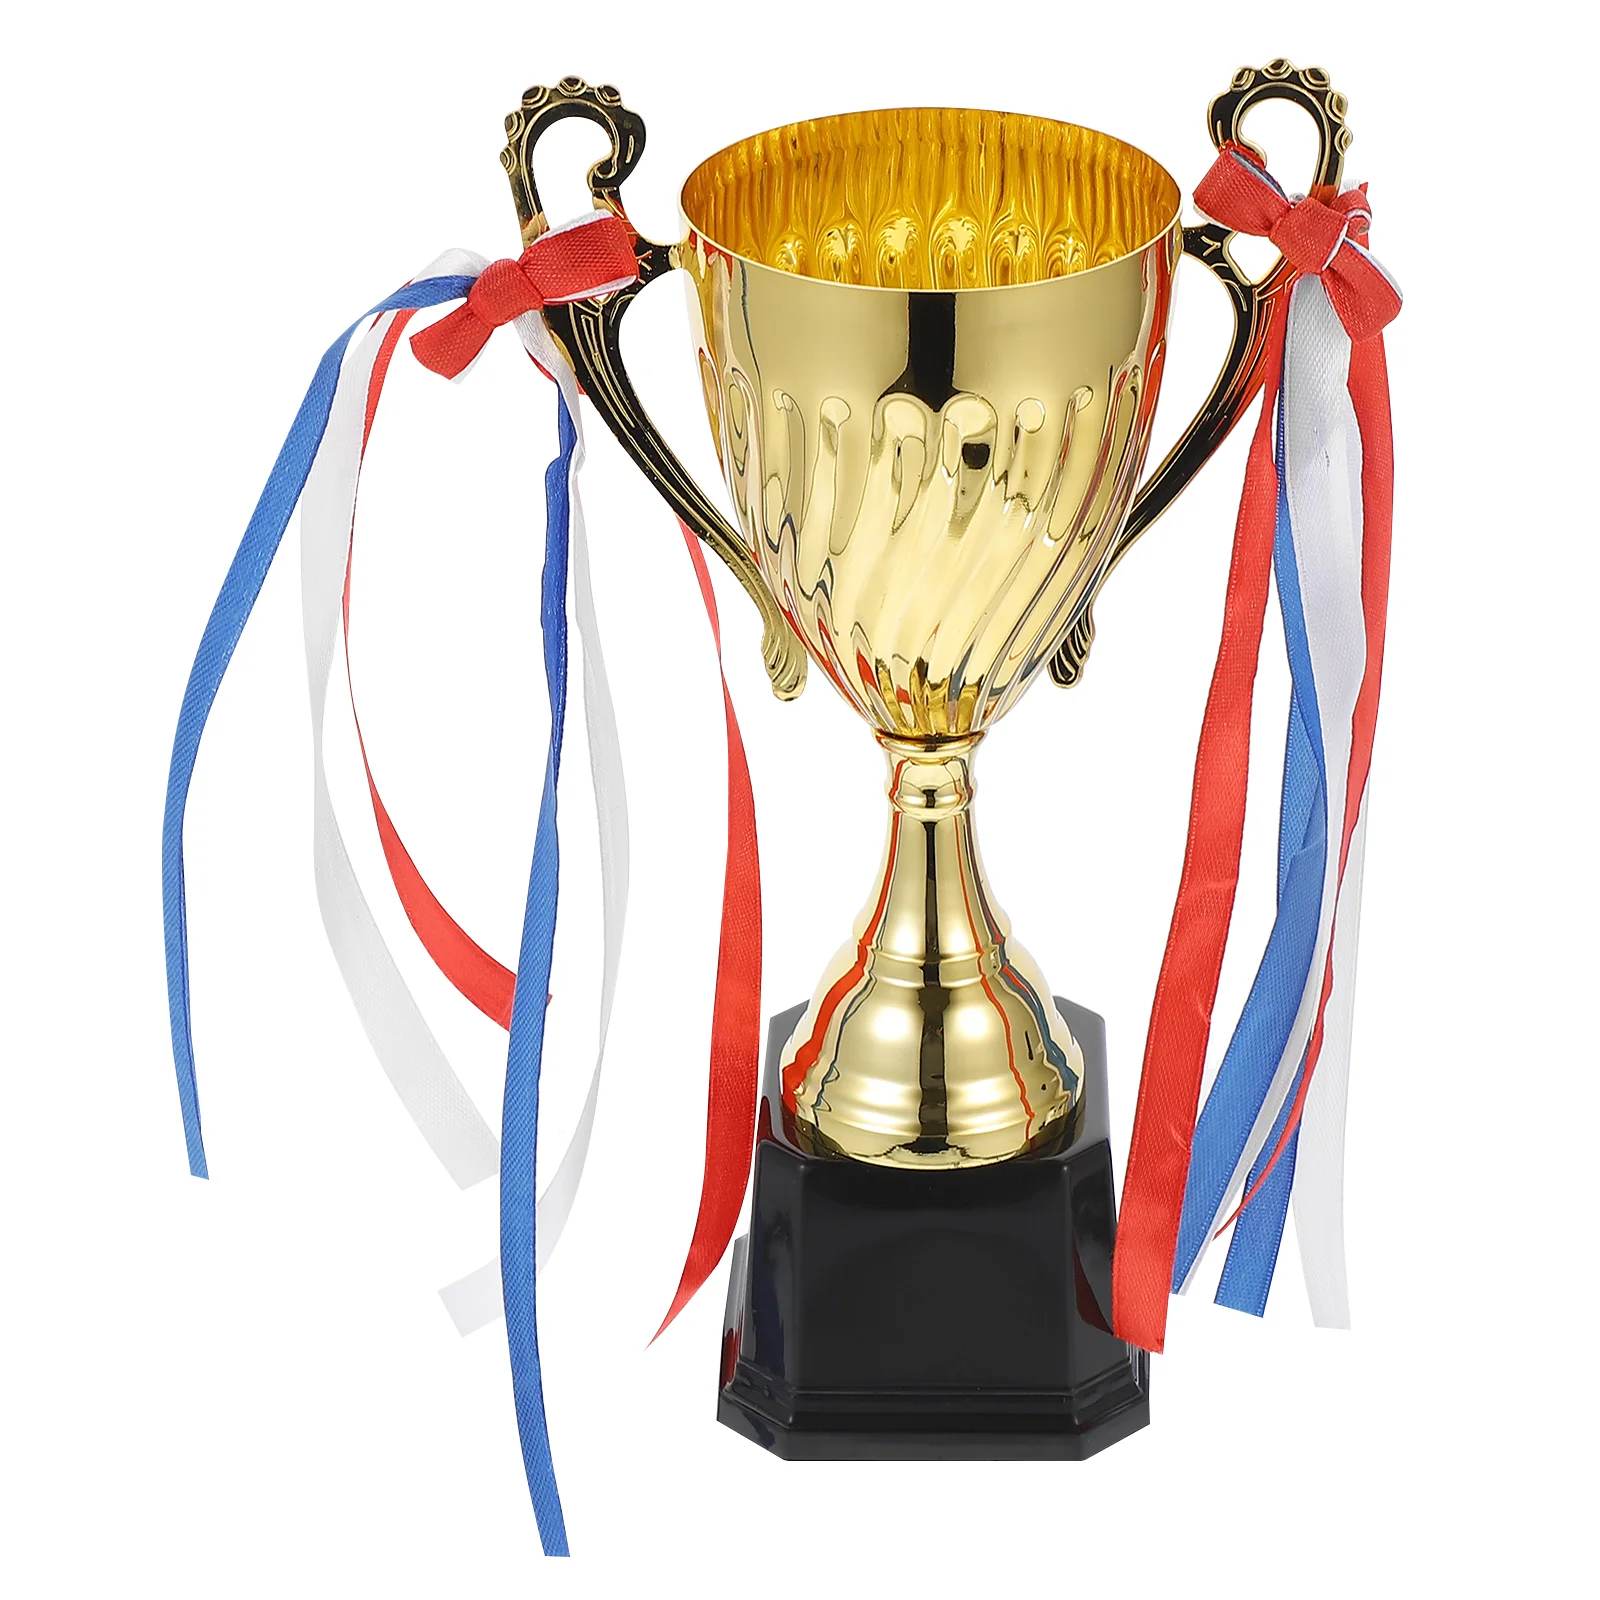 

Trophy Trophies Award Gold Kids Awards Cup Party Basketball Medals Game Competition Classic Cups Football Favor Winner Metal Toy